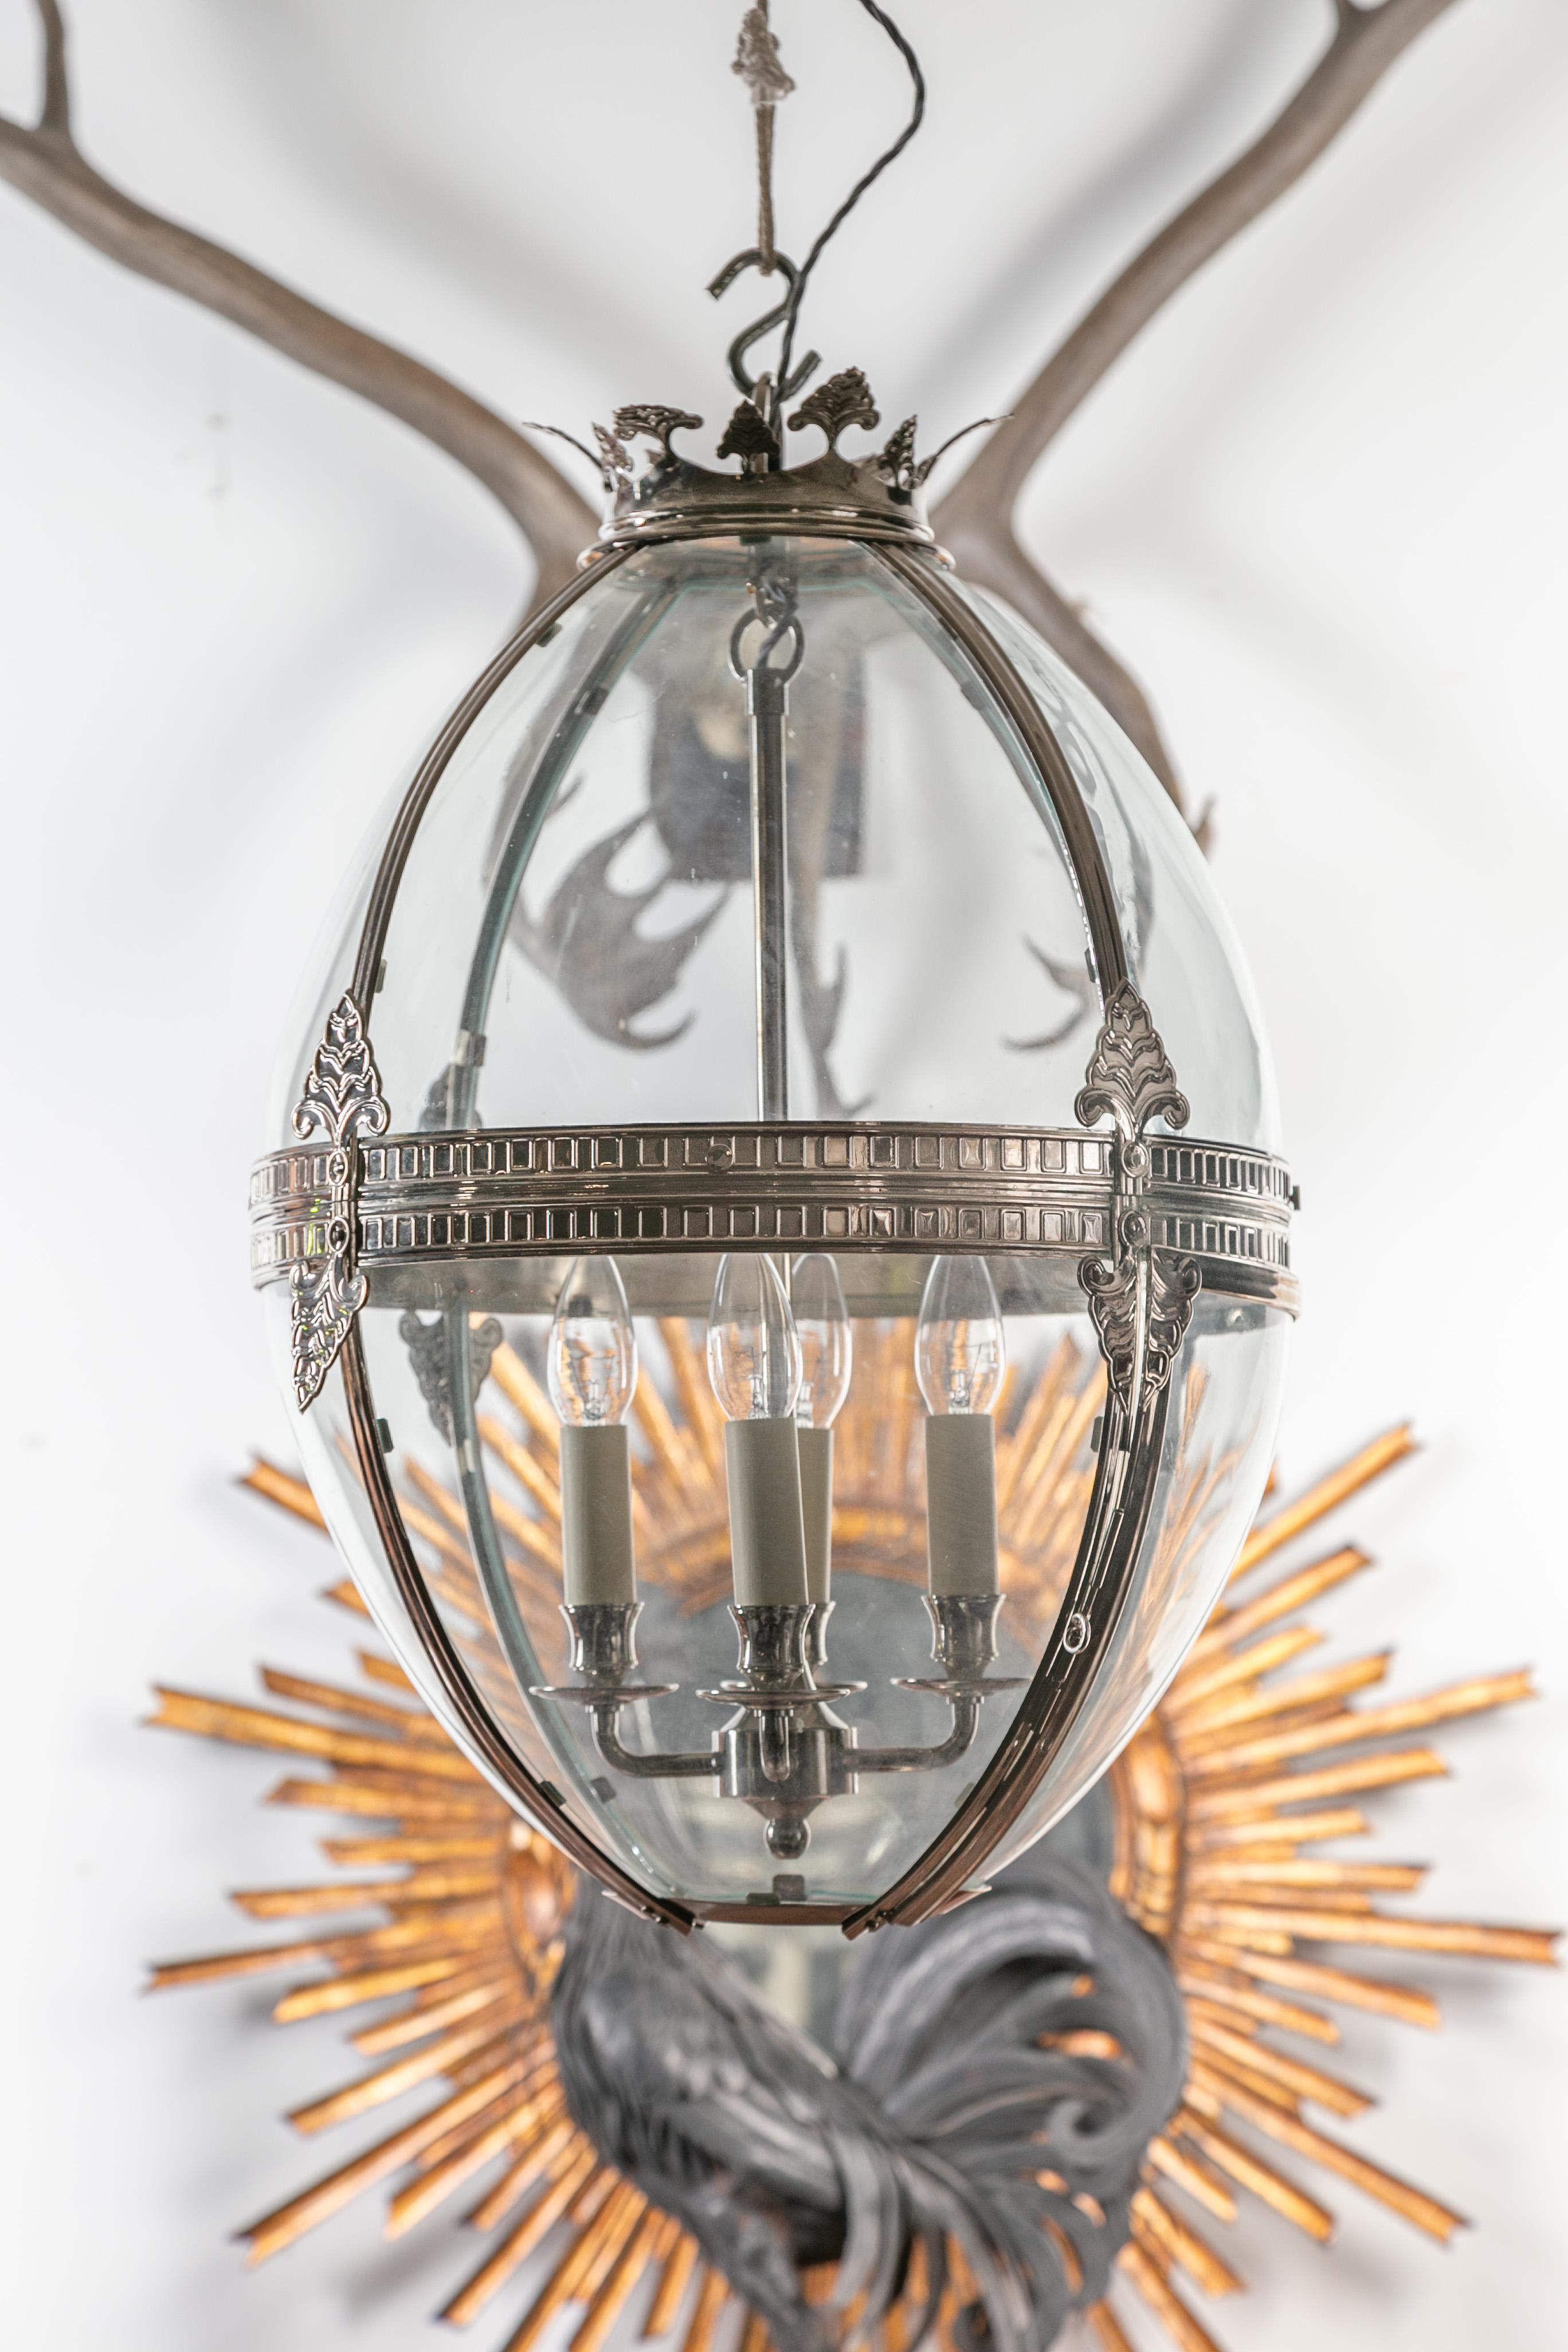 An English vintage four-light ovoid nickel light fixture from the mid-20th century, with palmette motifs and glass panels. Created in England during the midcentury period, this nickel light fixture captures our attention with its ovoid silhouette,